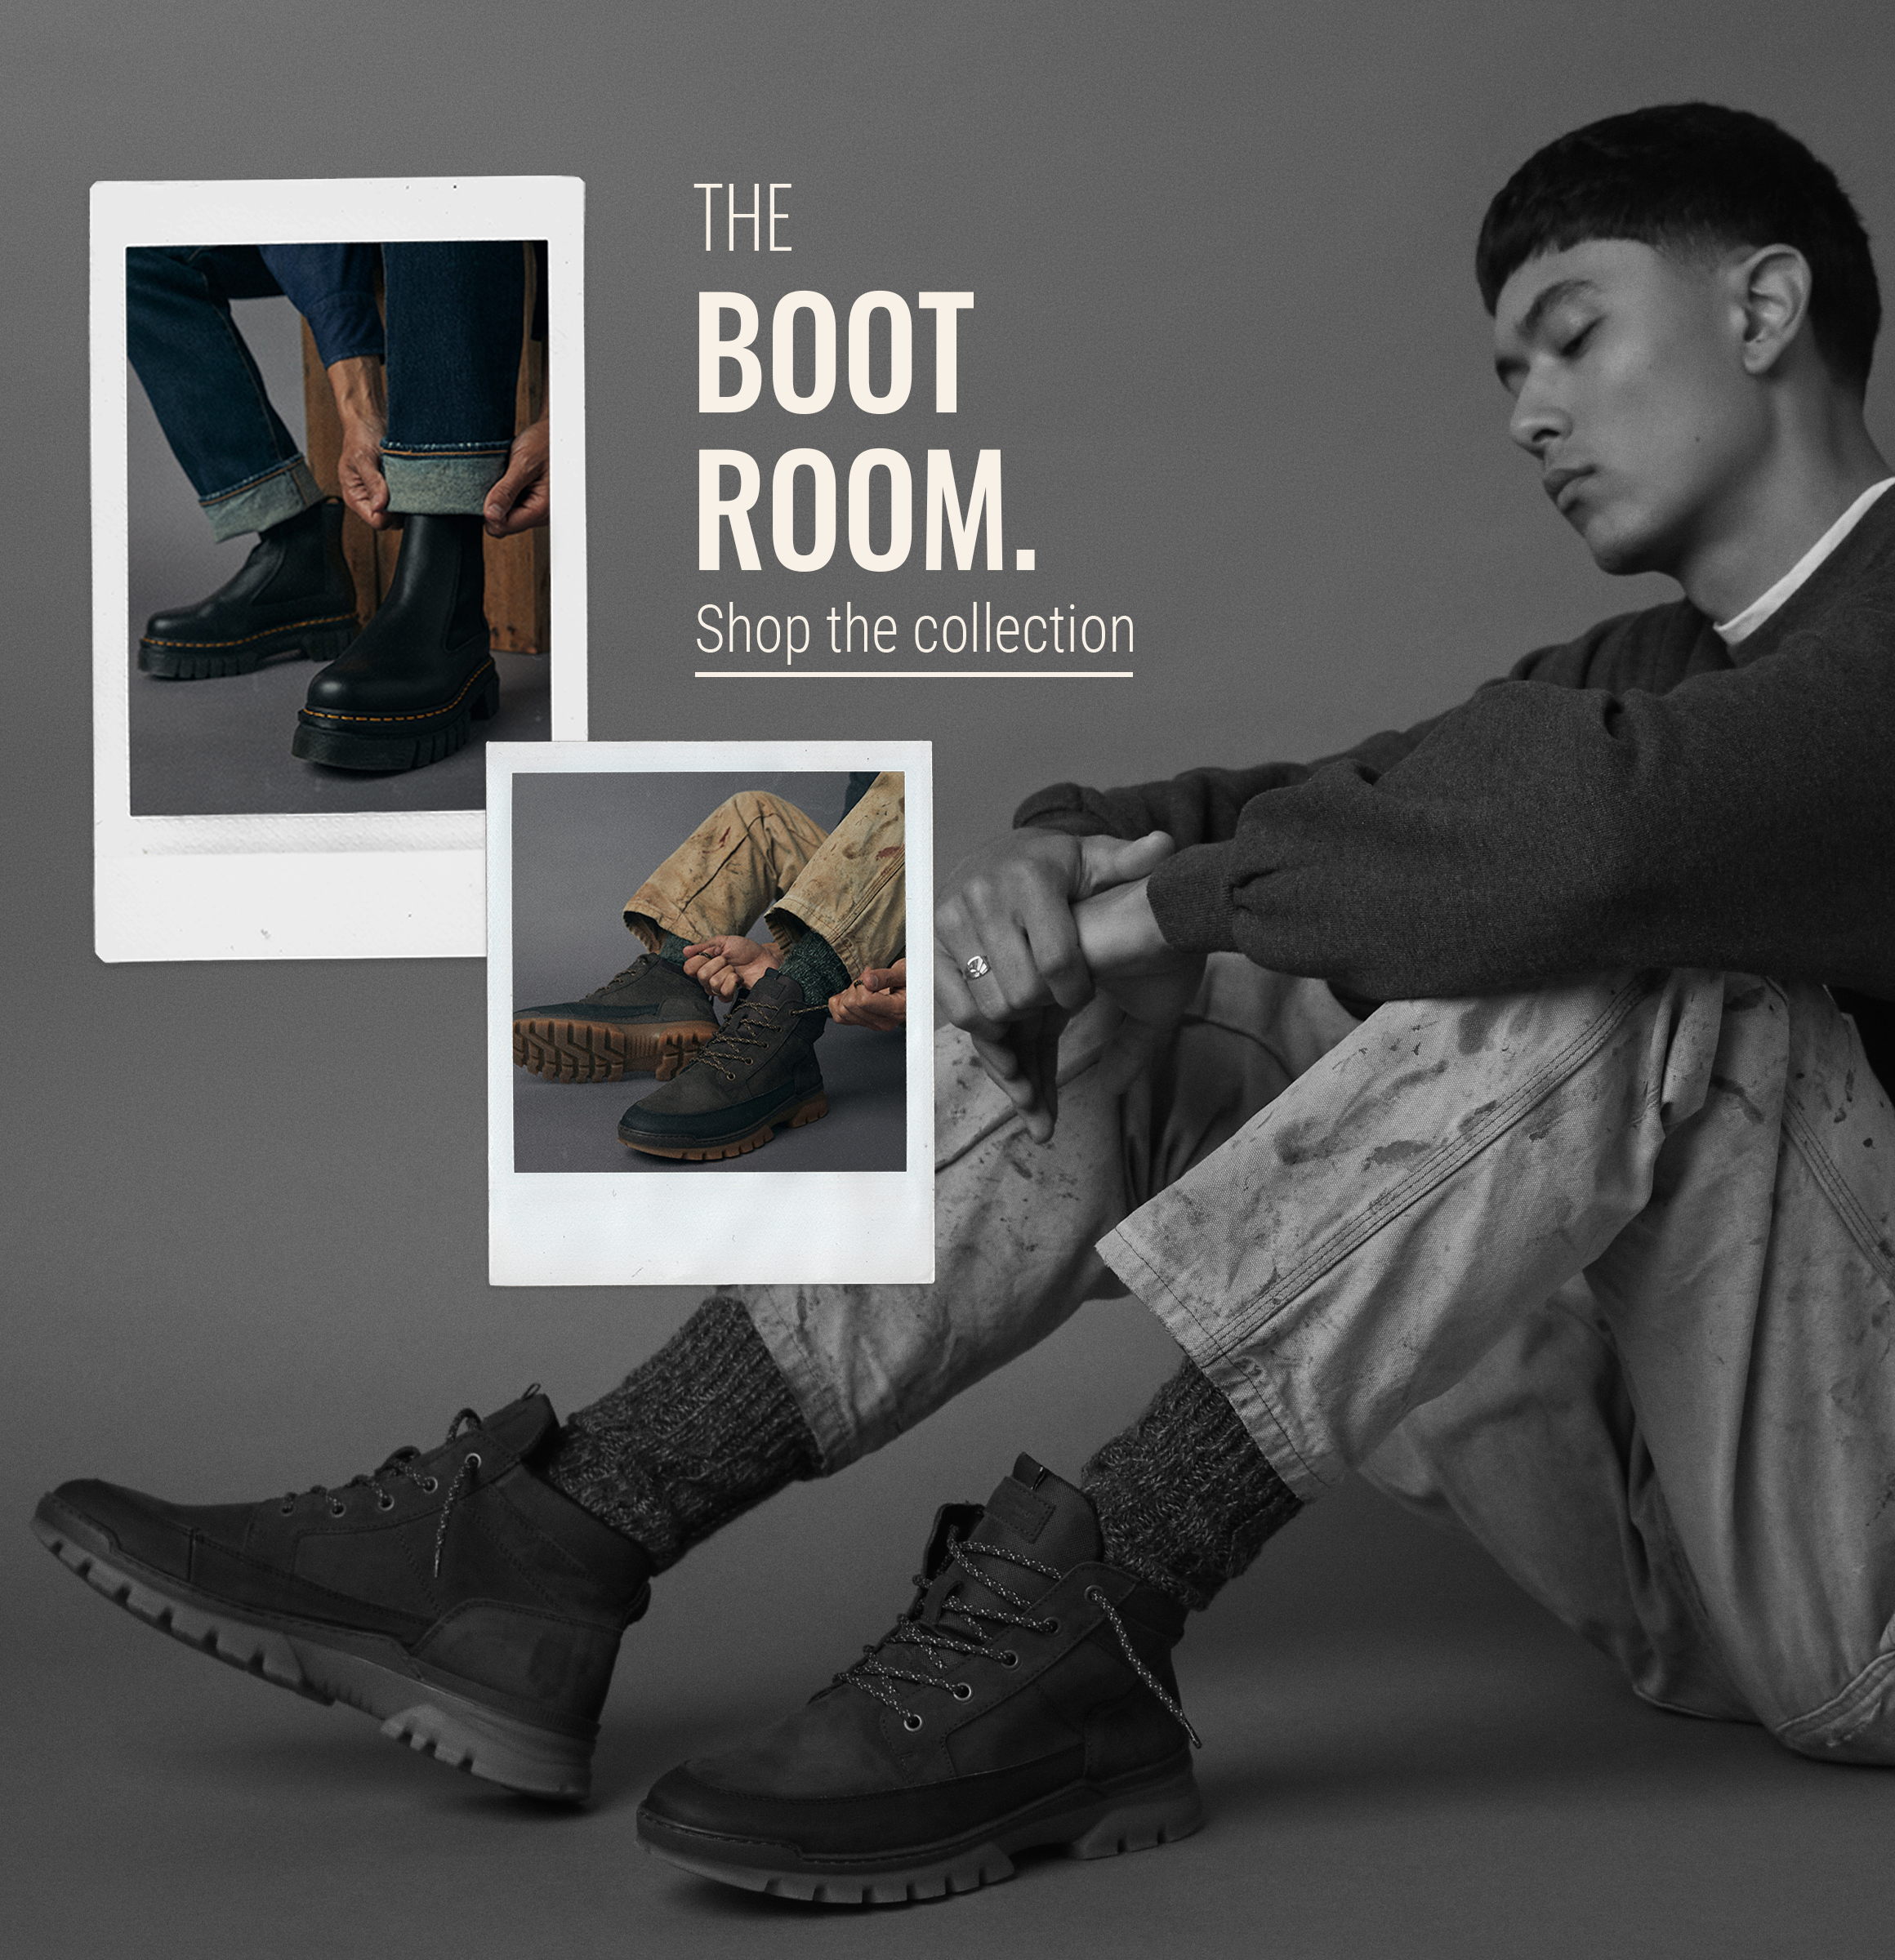 The Boot Room